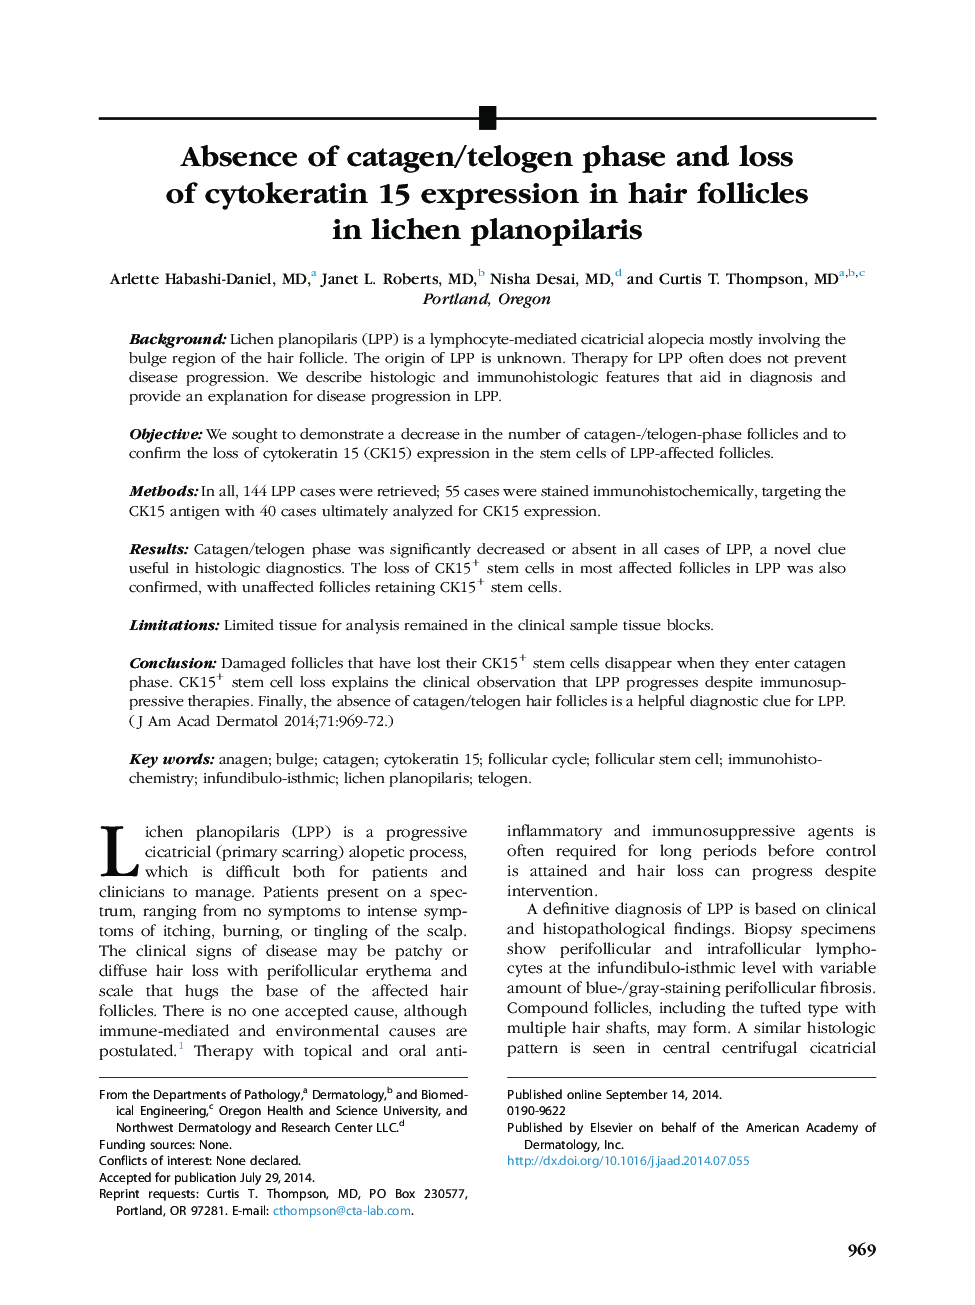 Absence of catagen/telogen phase and loss of cytokeratin 15 expression in hair follicles in lichen planopilaris